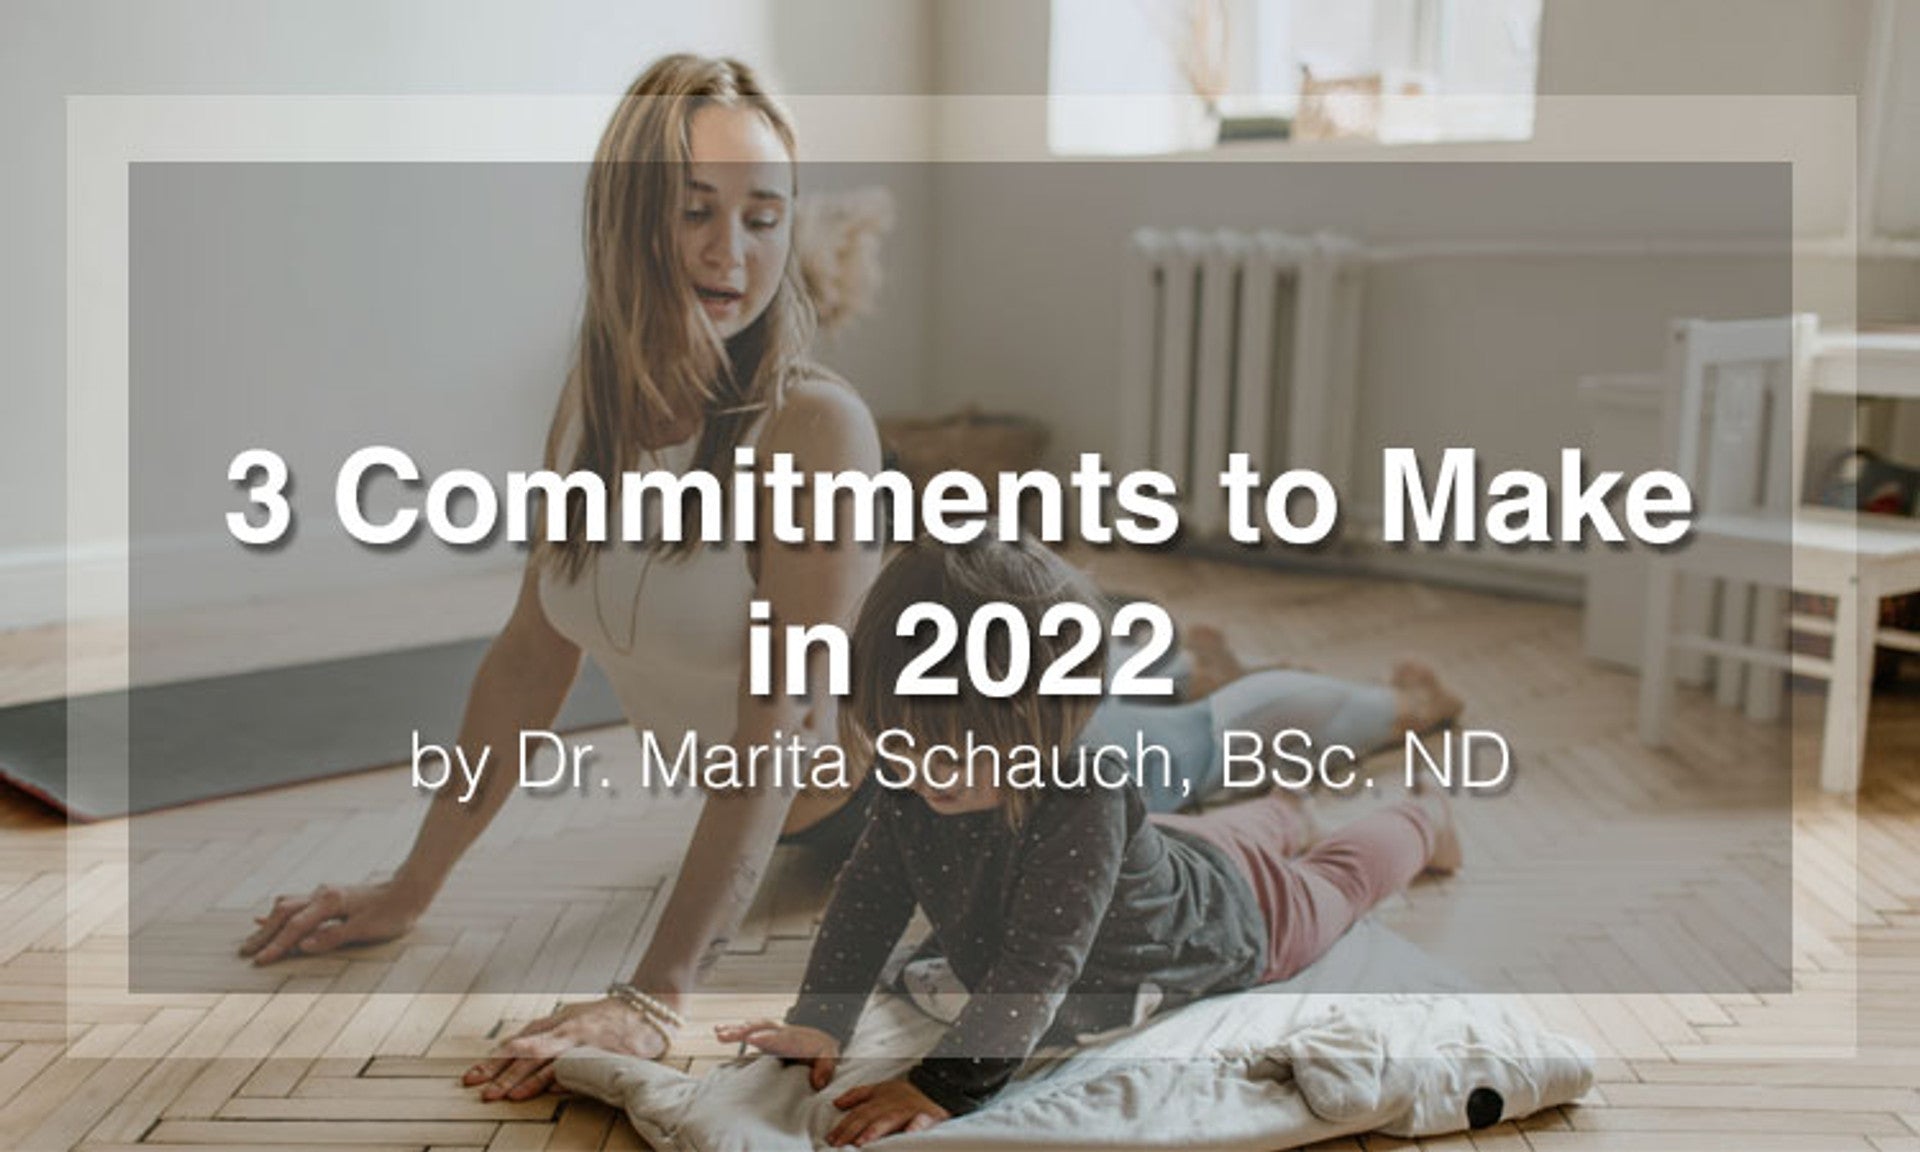 Three Commitments to Make in 2022